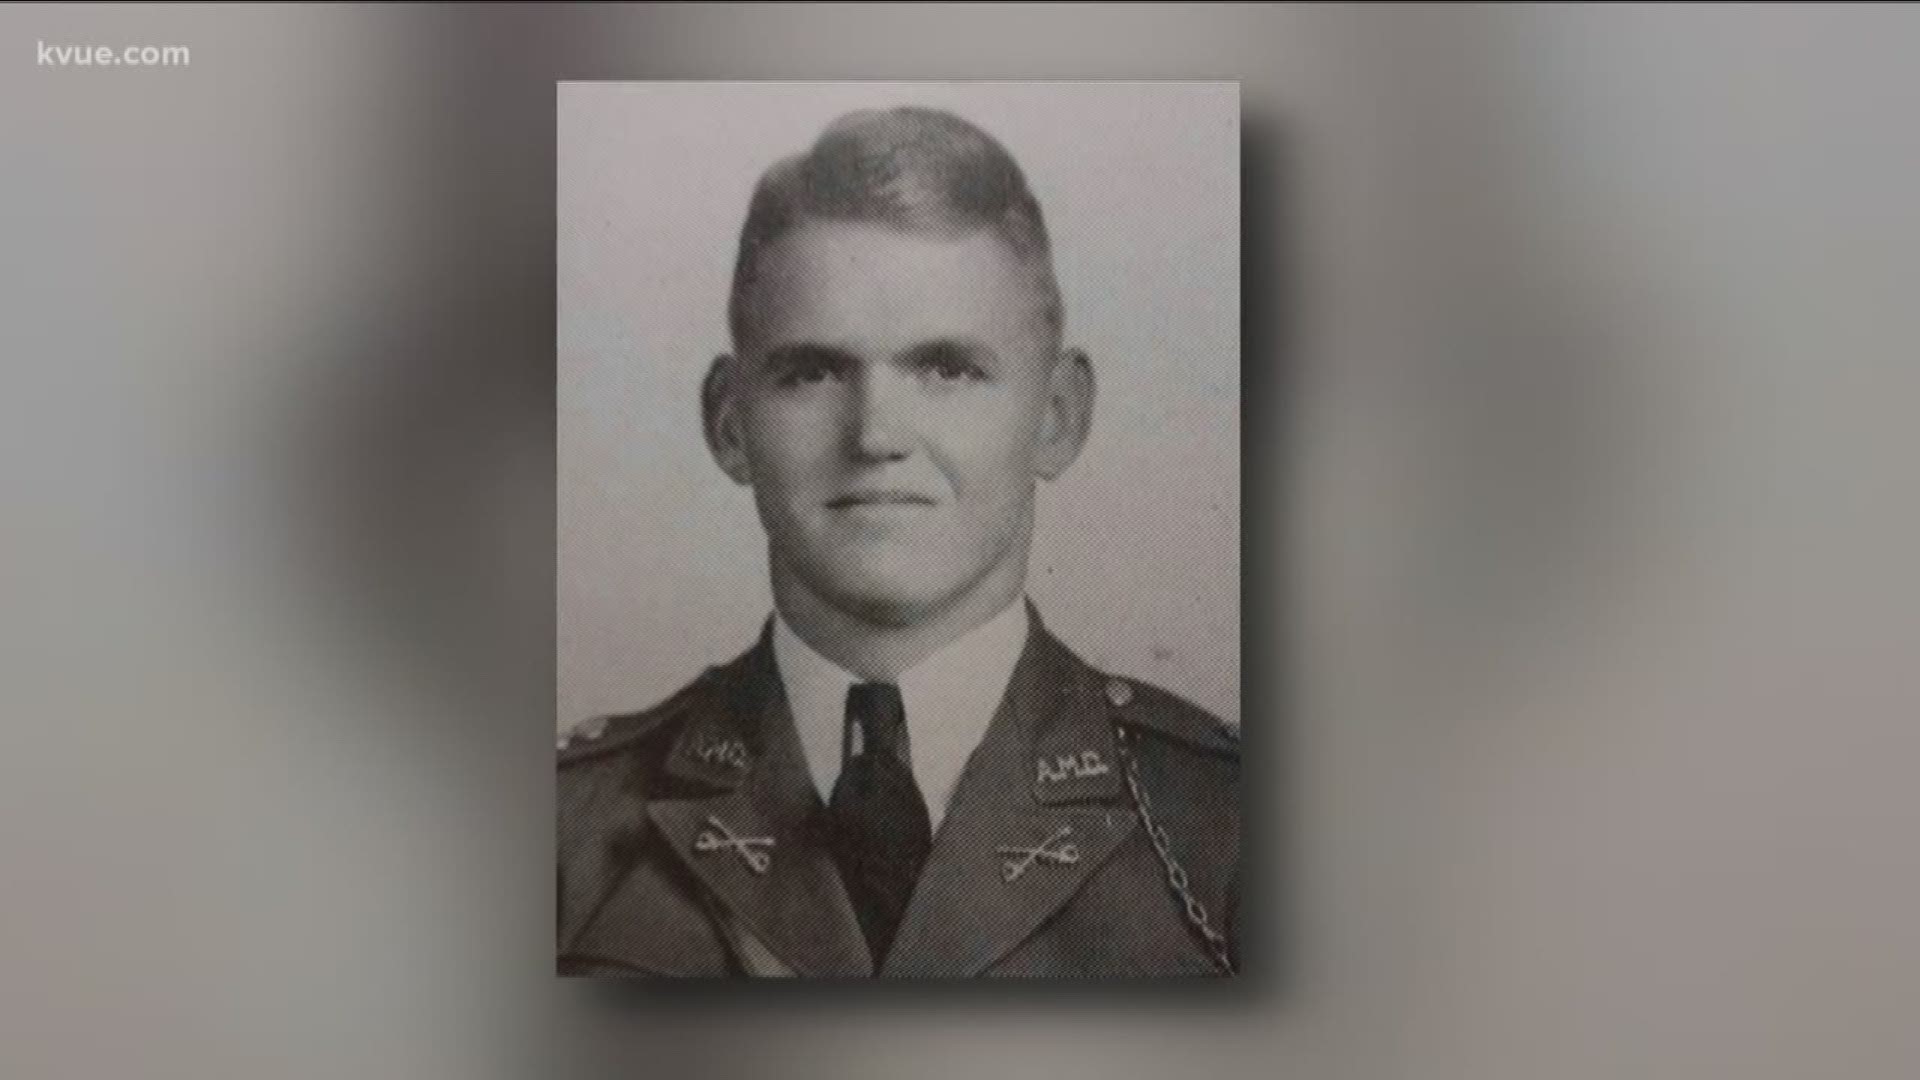 It took decades for the U.S. government to find and identify Korean War hero Major Harvey Storms.